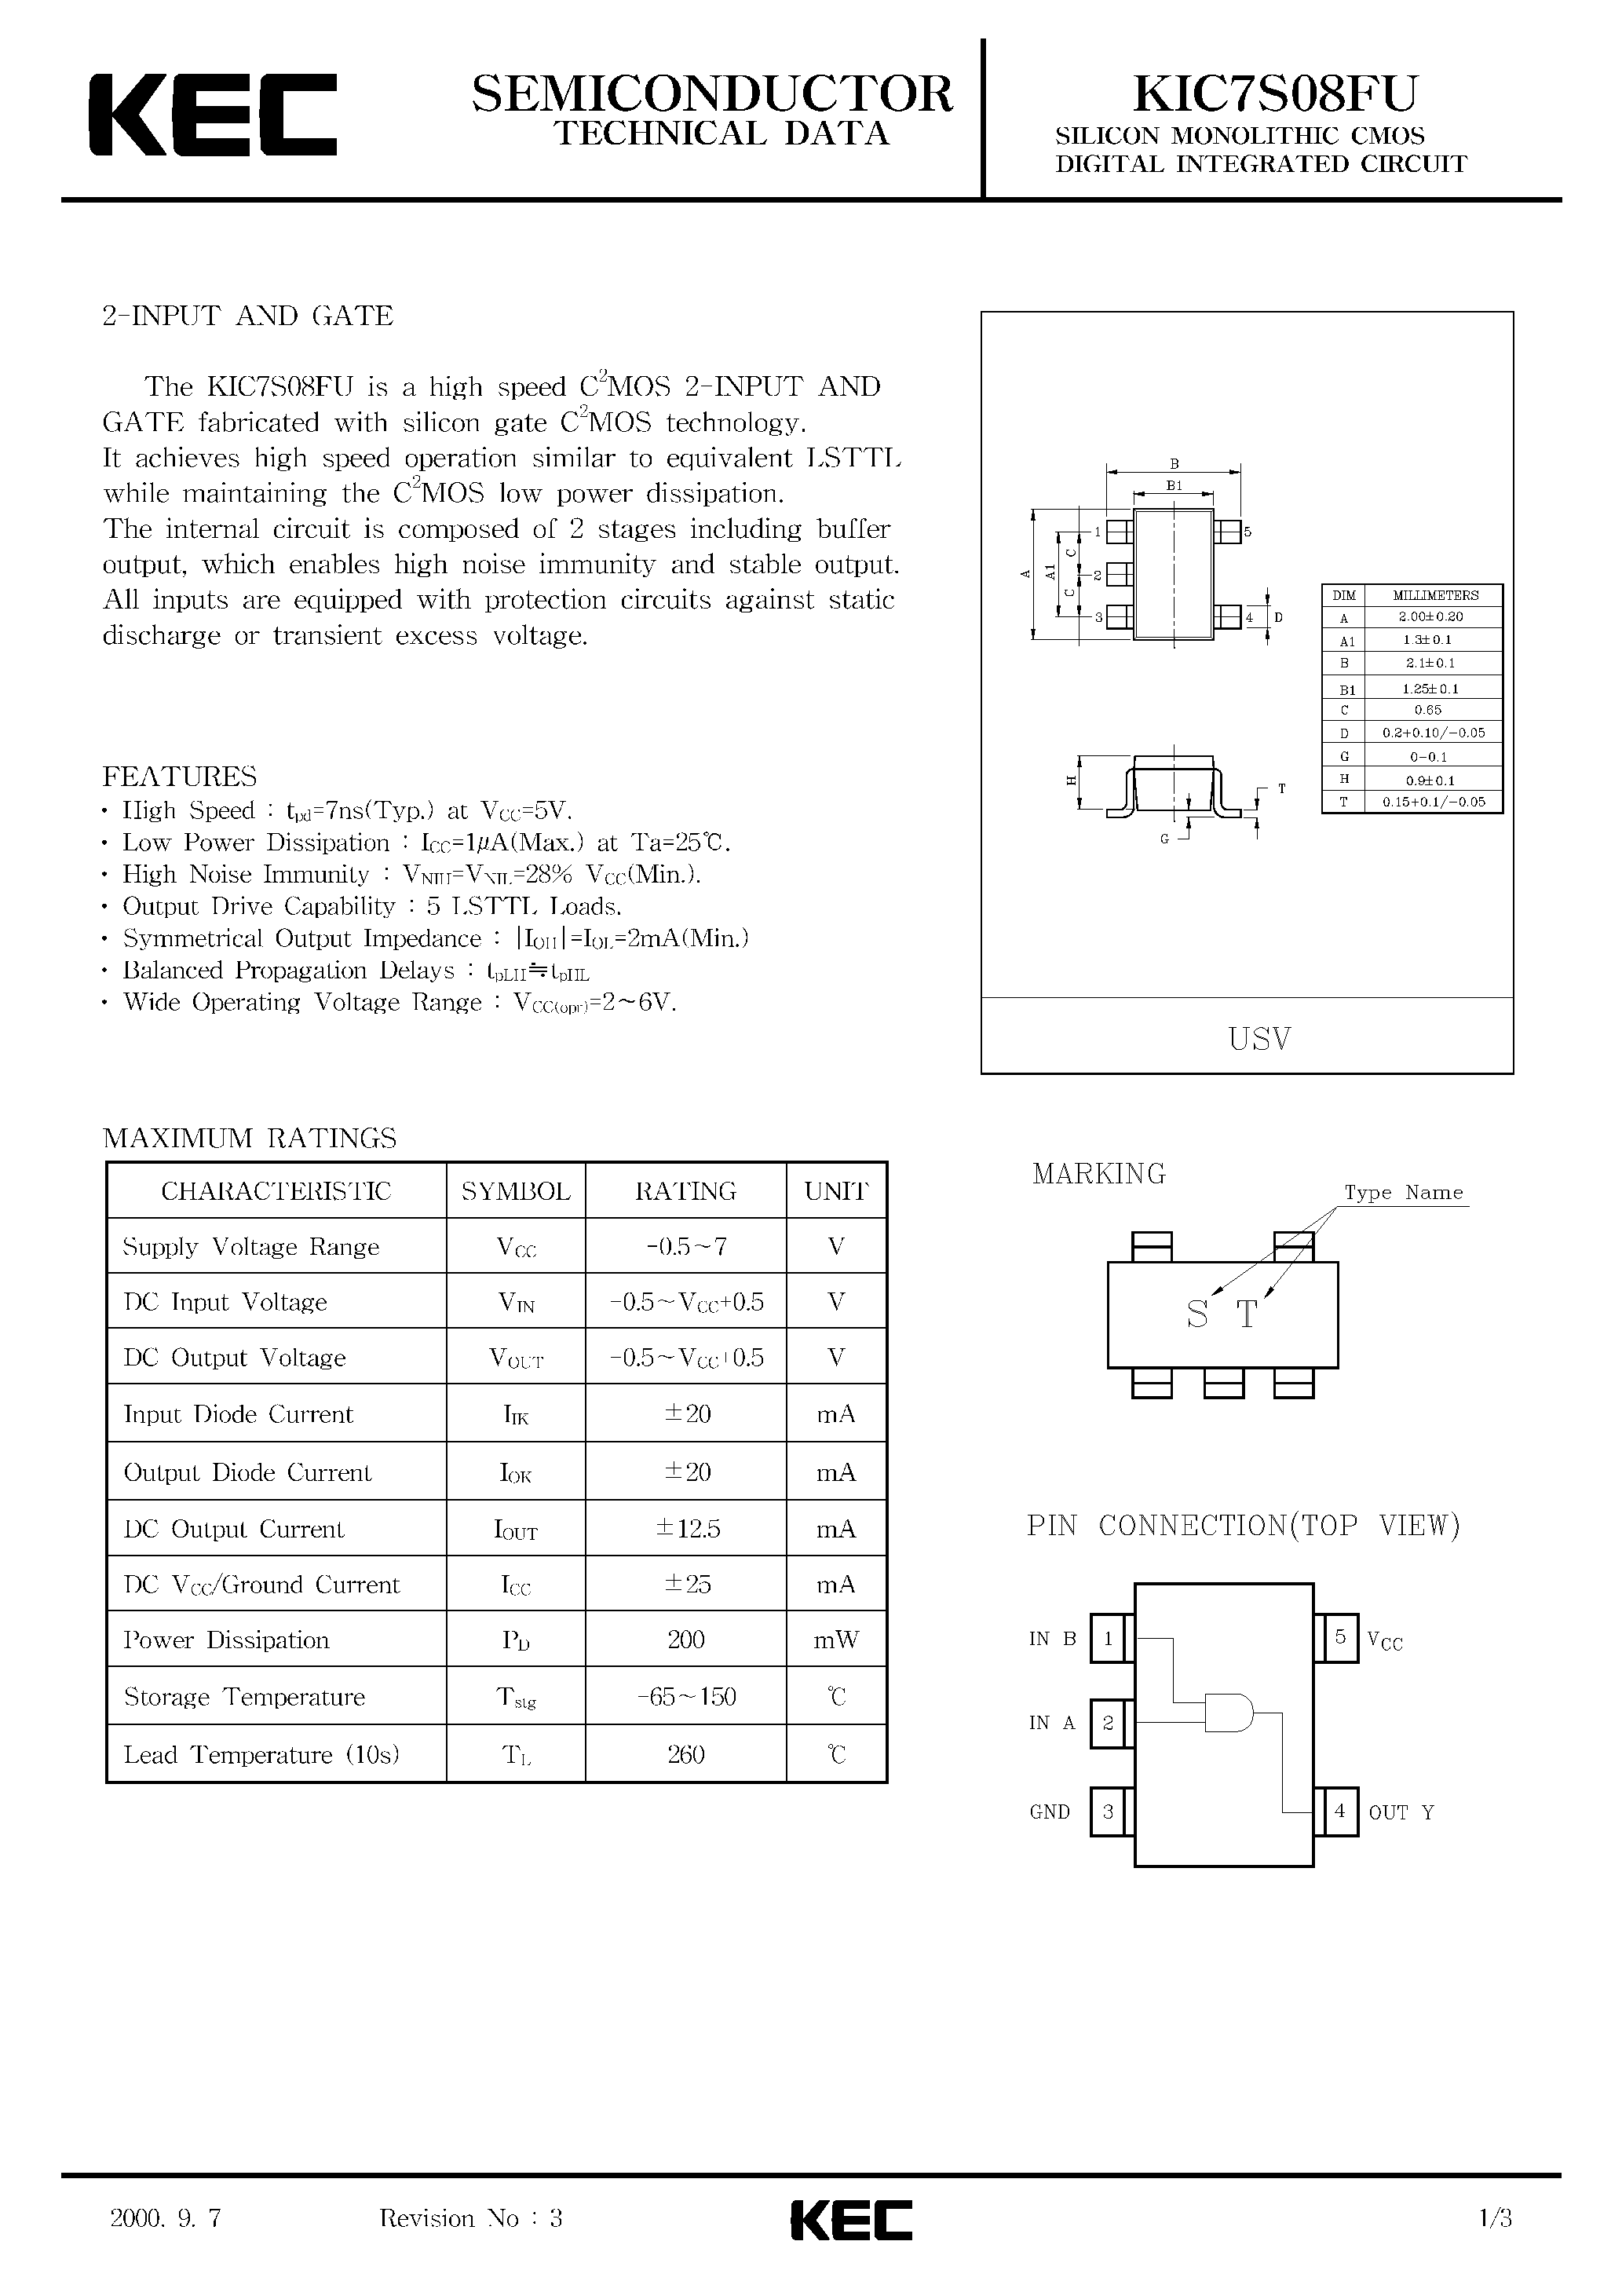 Даташит KIC7S08FU - SILICON MONOLITHIC CMOS DIGITAL INTEGRATED CIRCUIT(2-INPUT AND GATE) страница 1